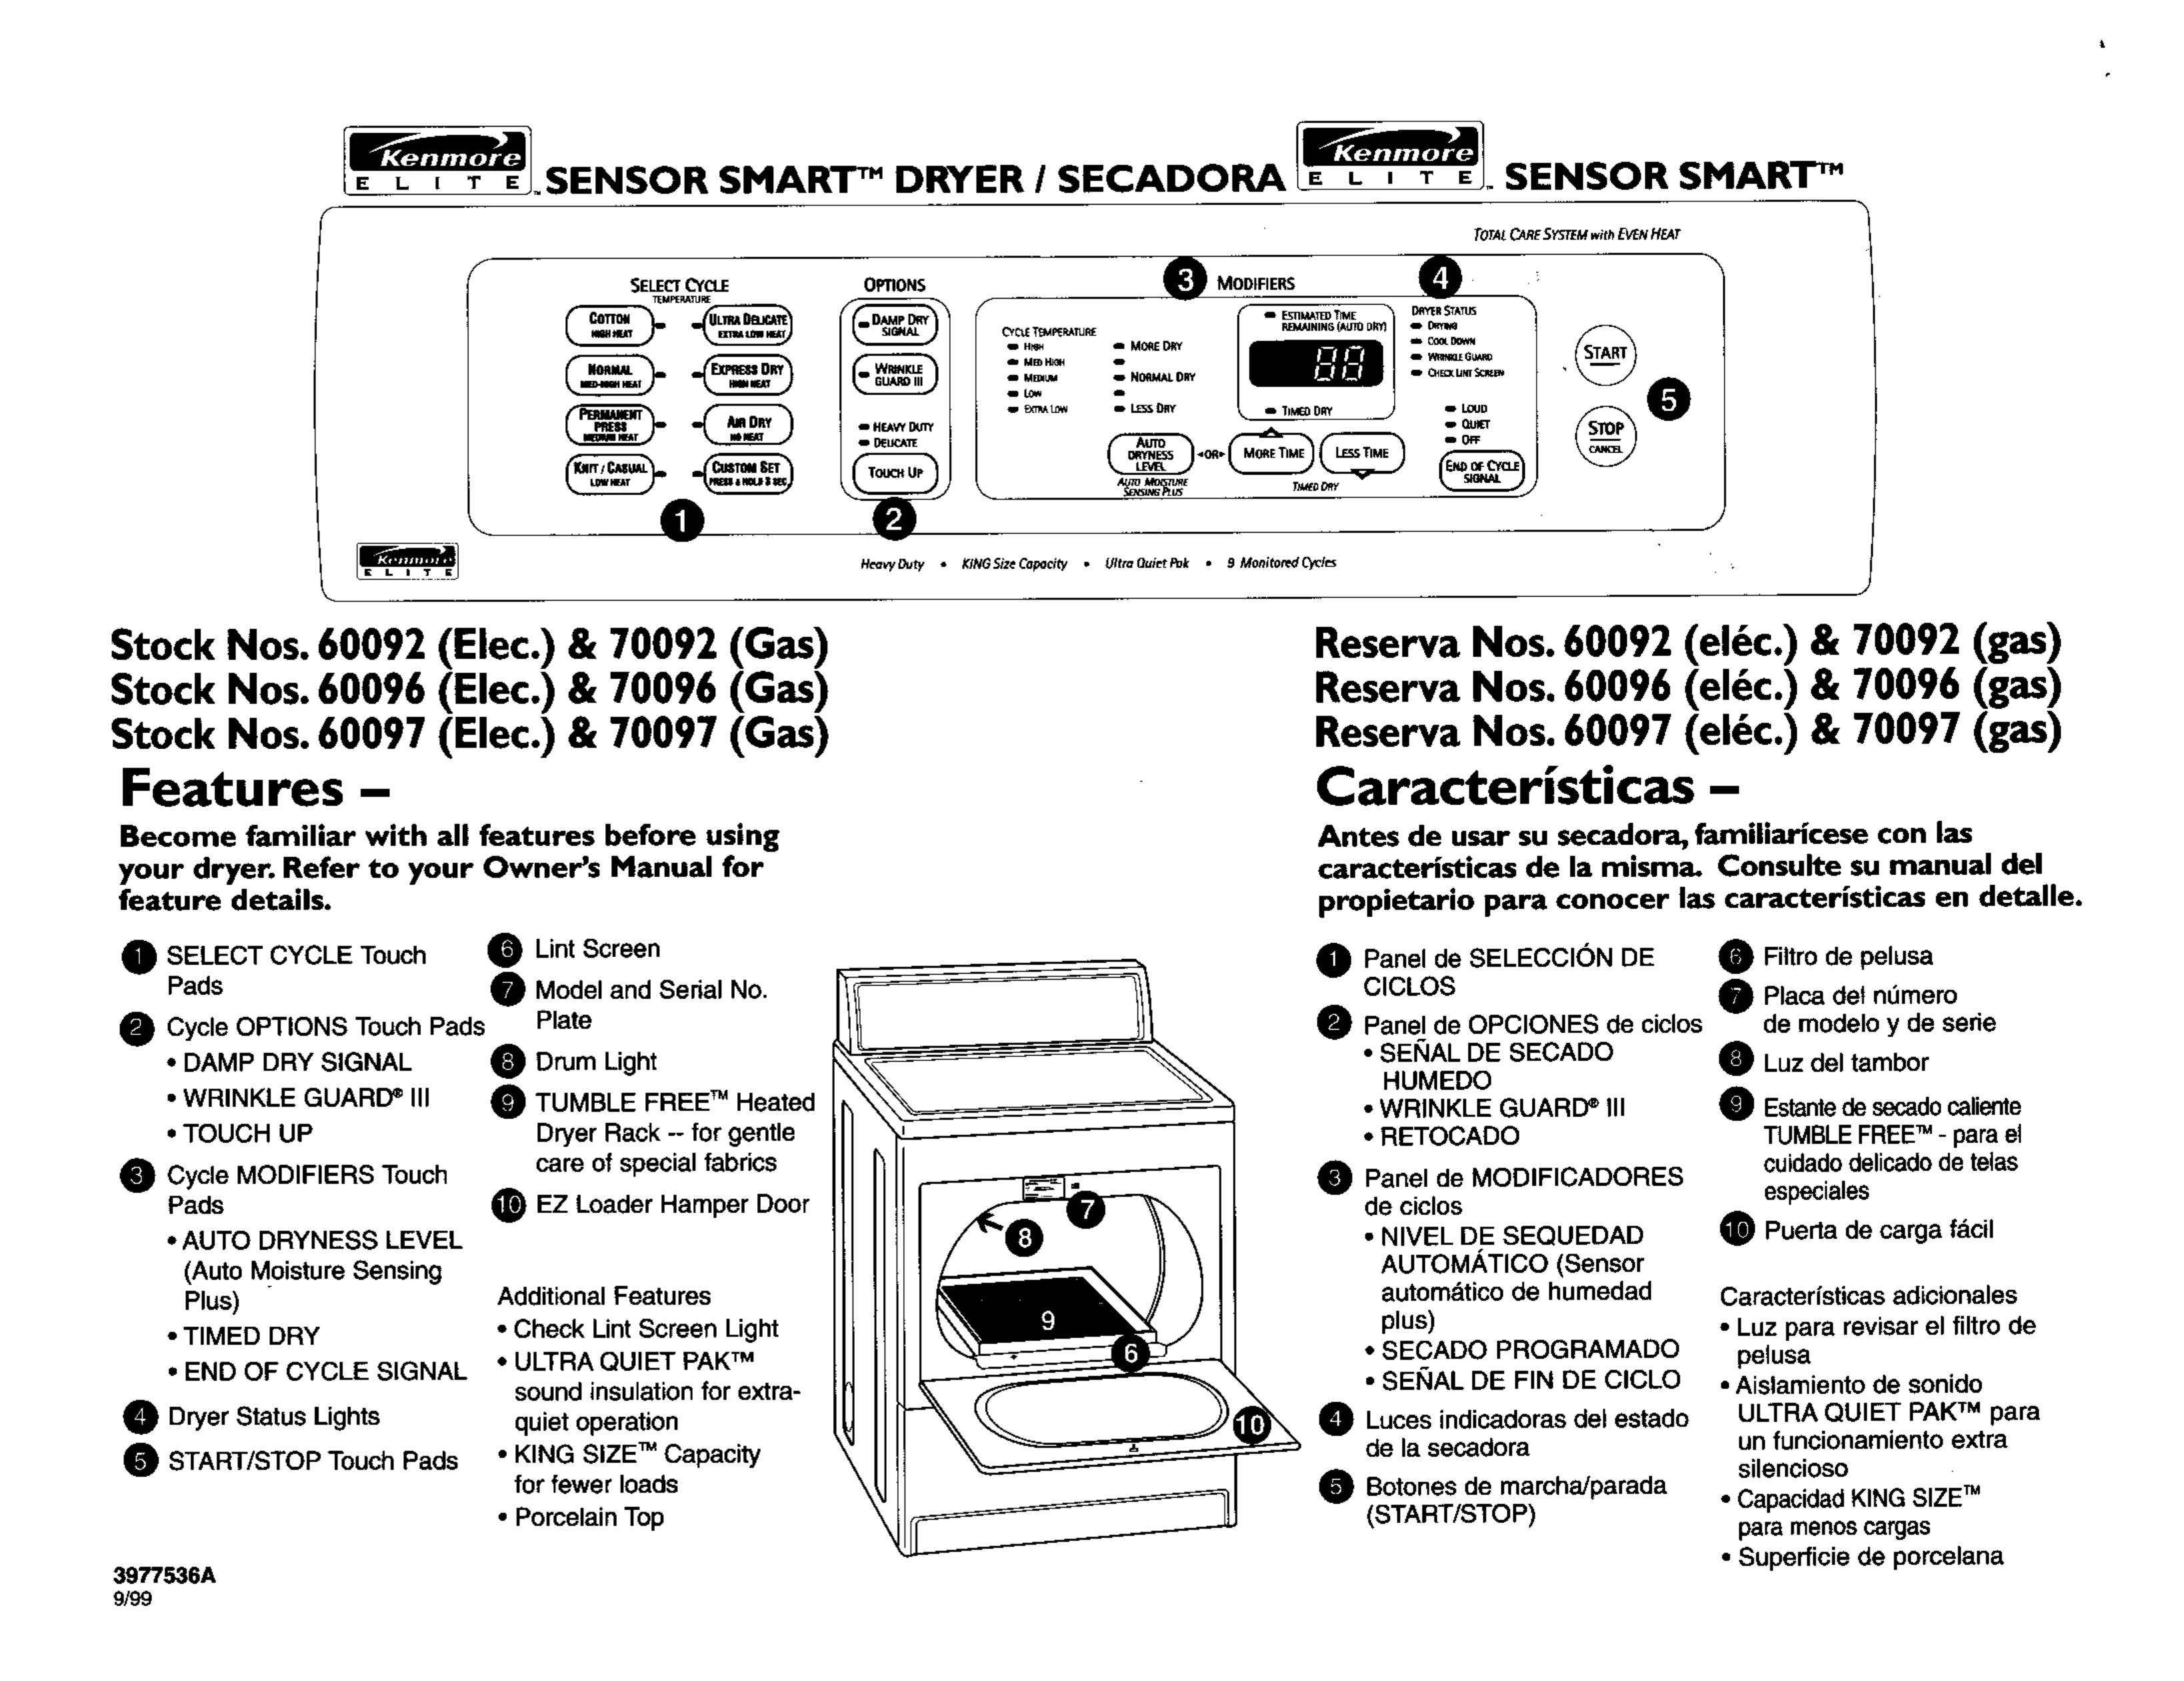 Kenmore 60097 Clothes Dryer User Manual